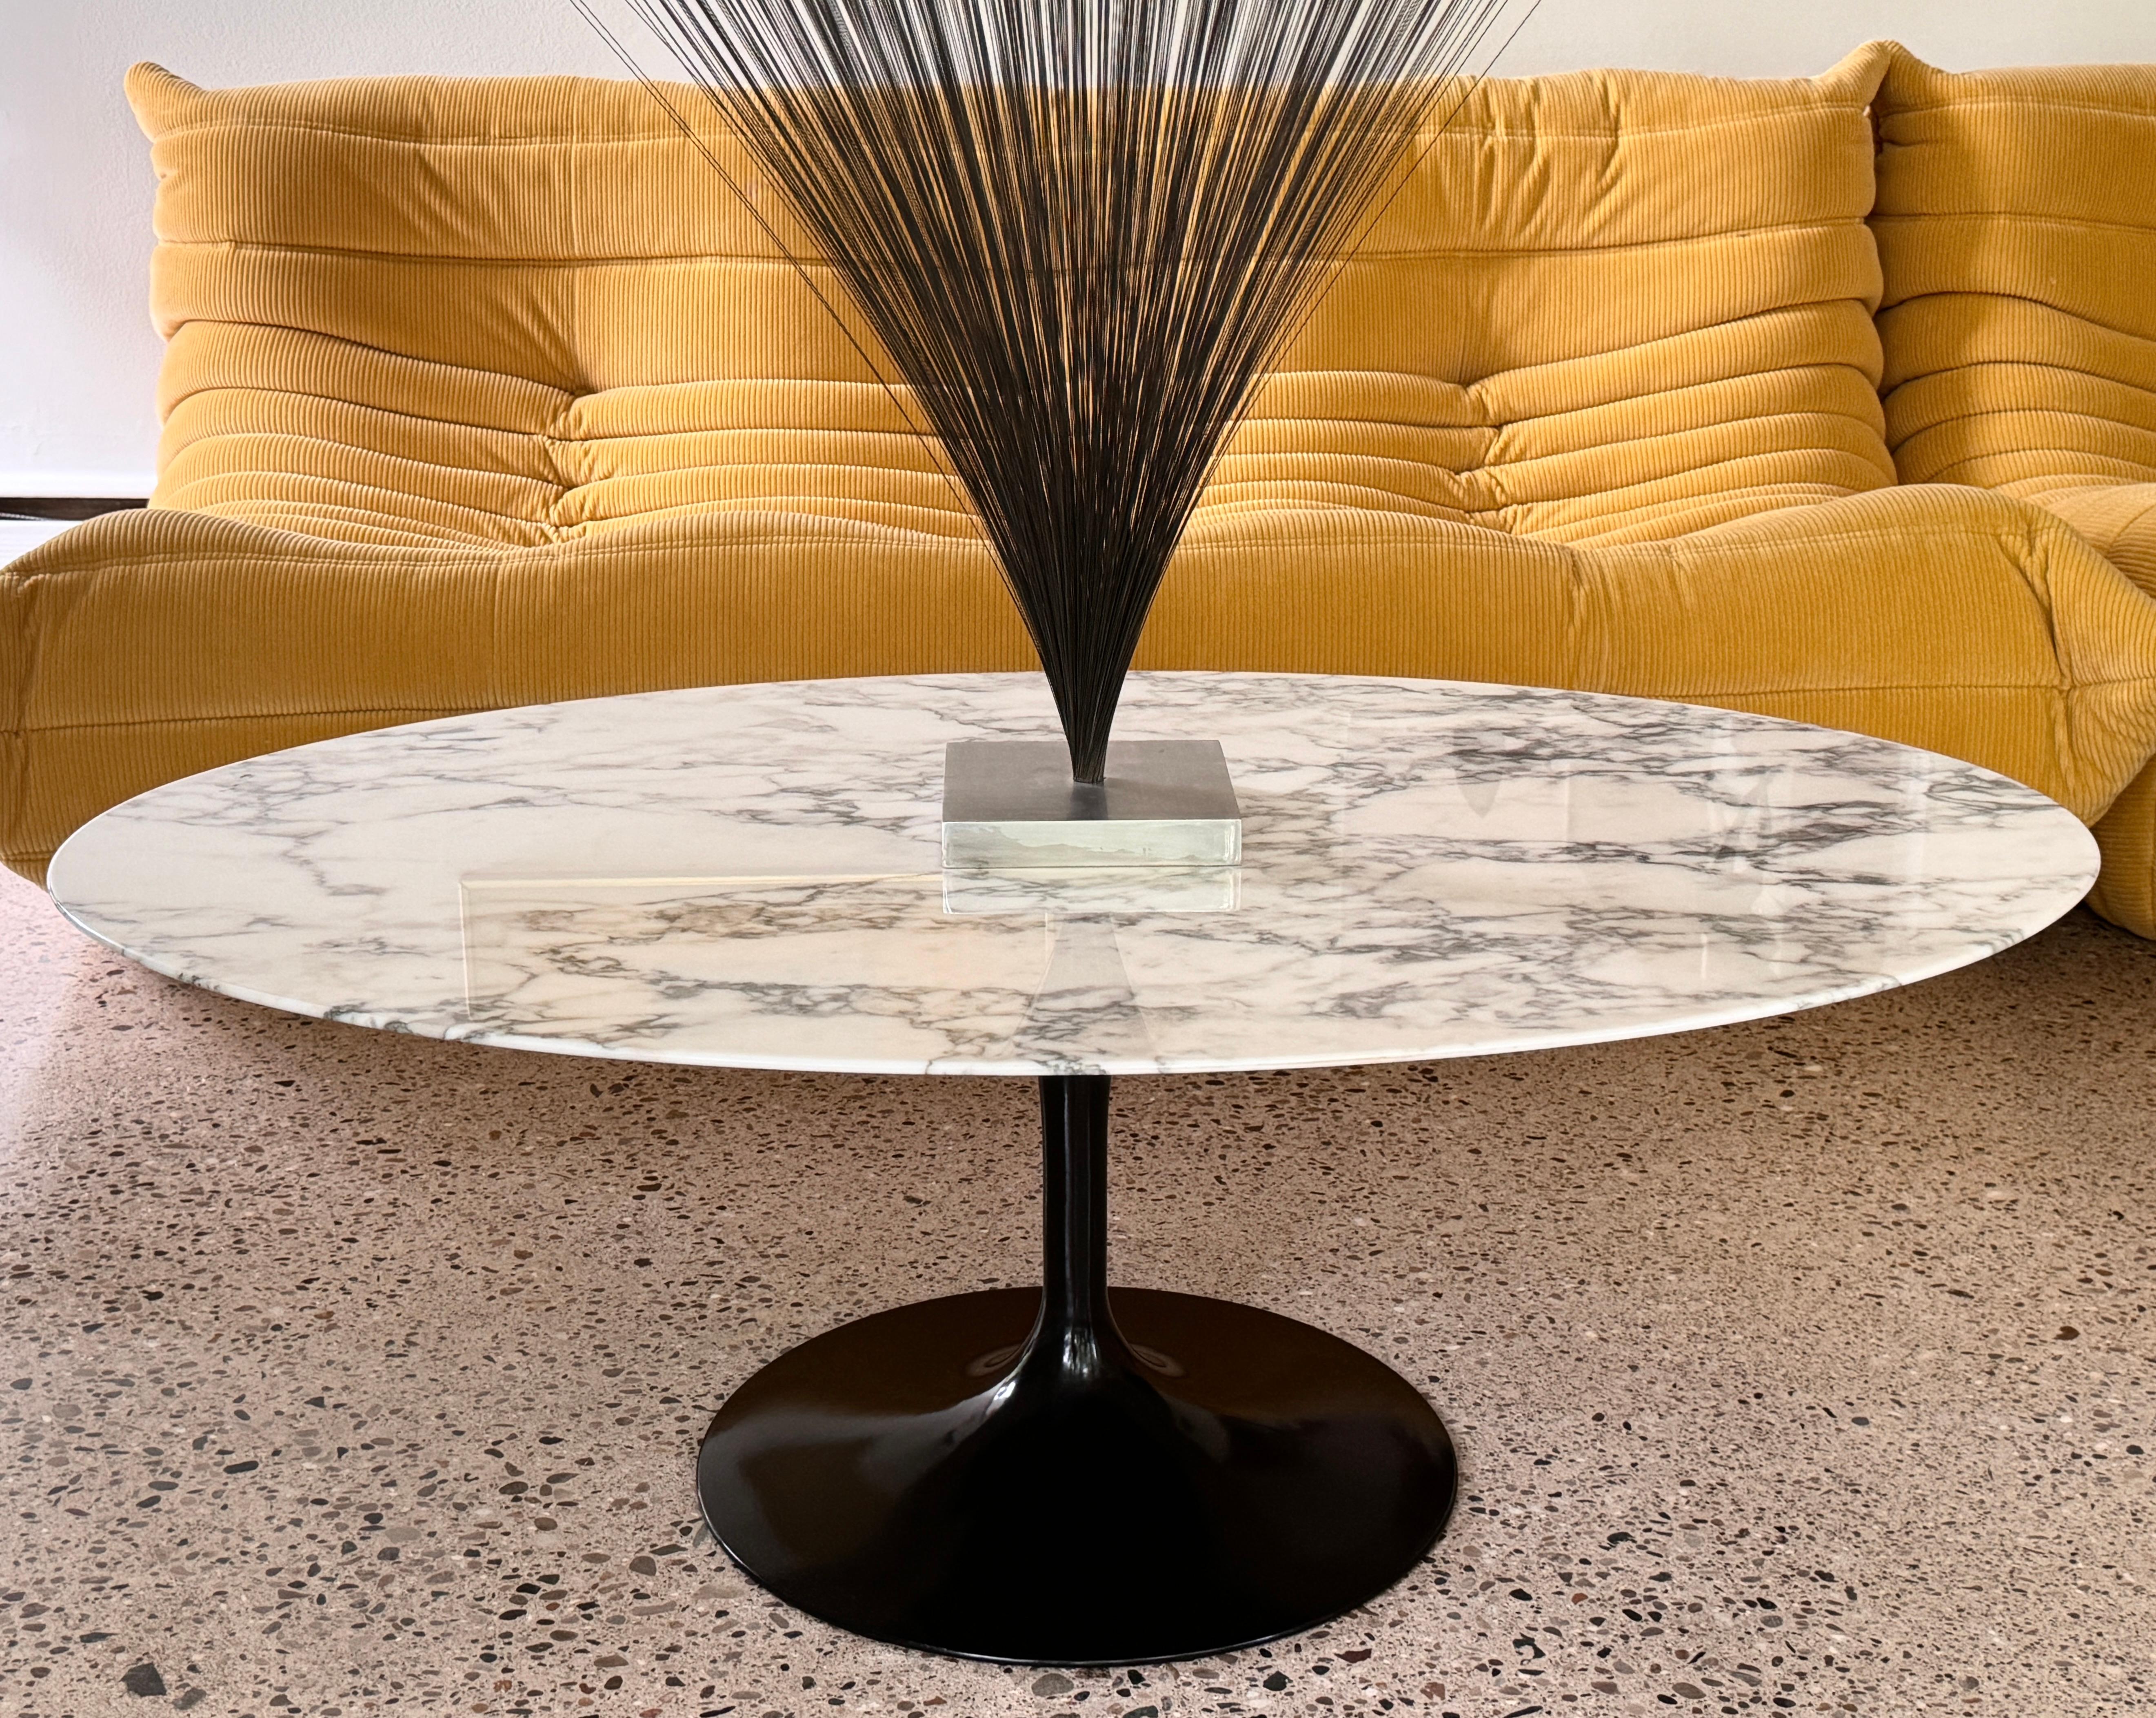 Mid-Century Modern Mid Century Modern Oval Tulip Coffee Table in Marble by Eero Saarinen for Knoll For Sale